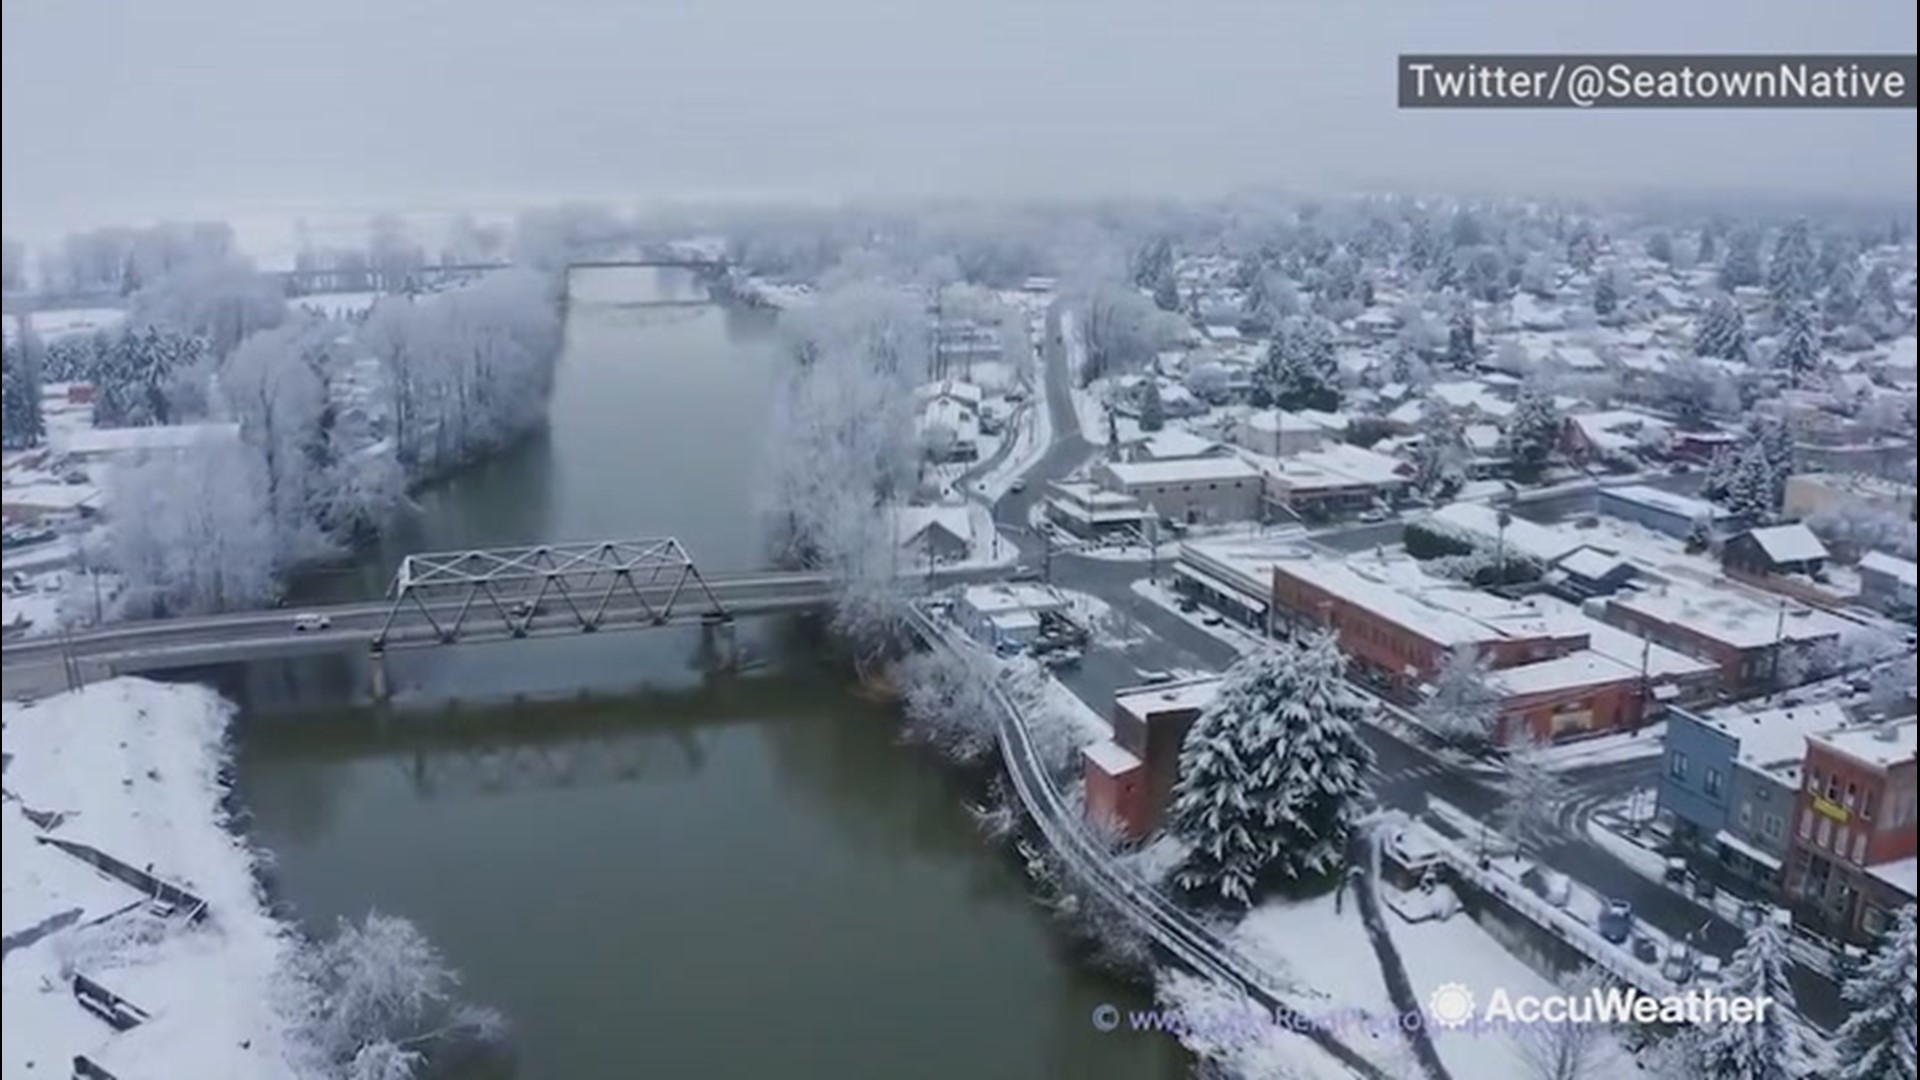 An aerial view of the snow that fell on Snohomish, Washington, on Jan. 13.